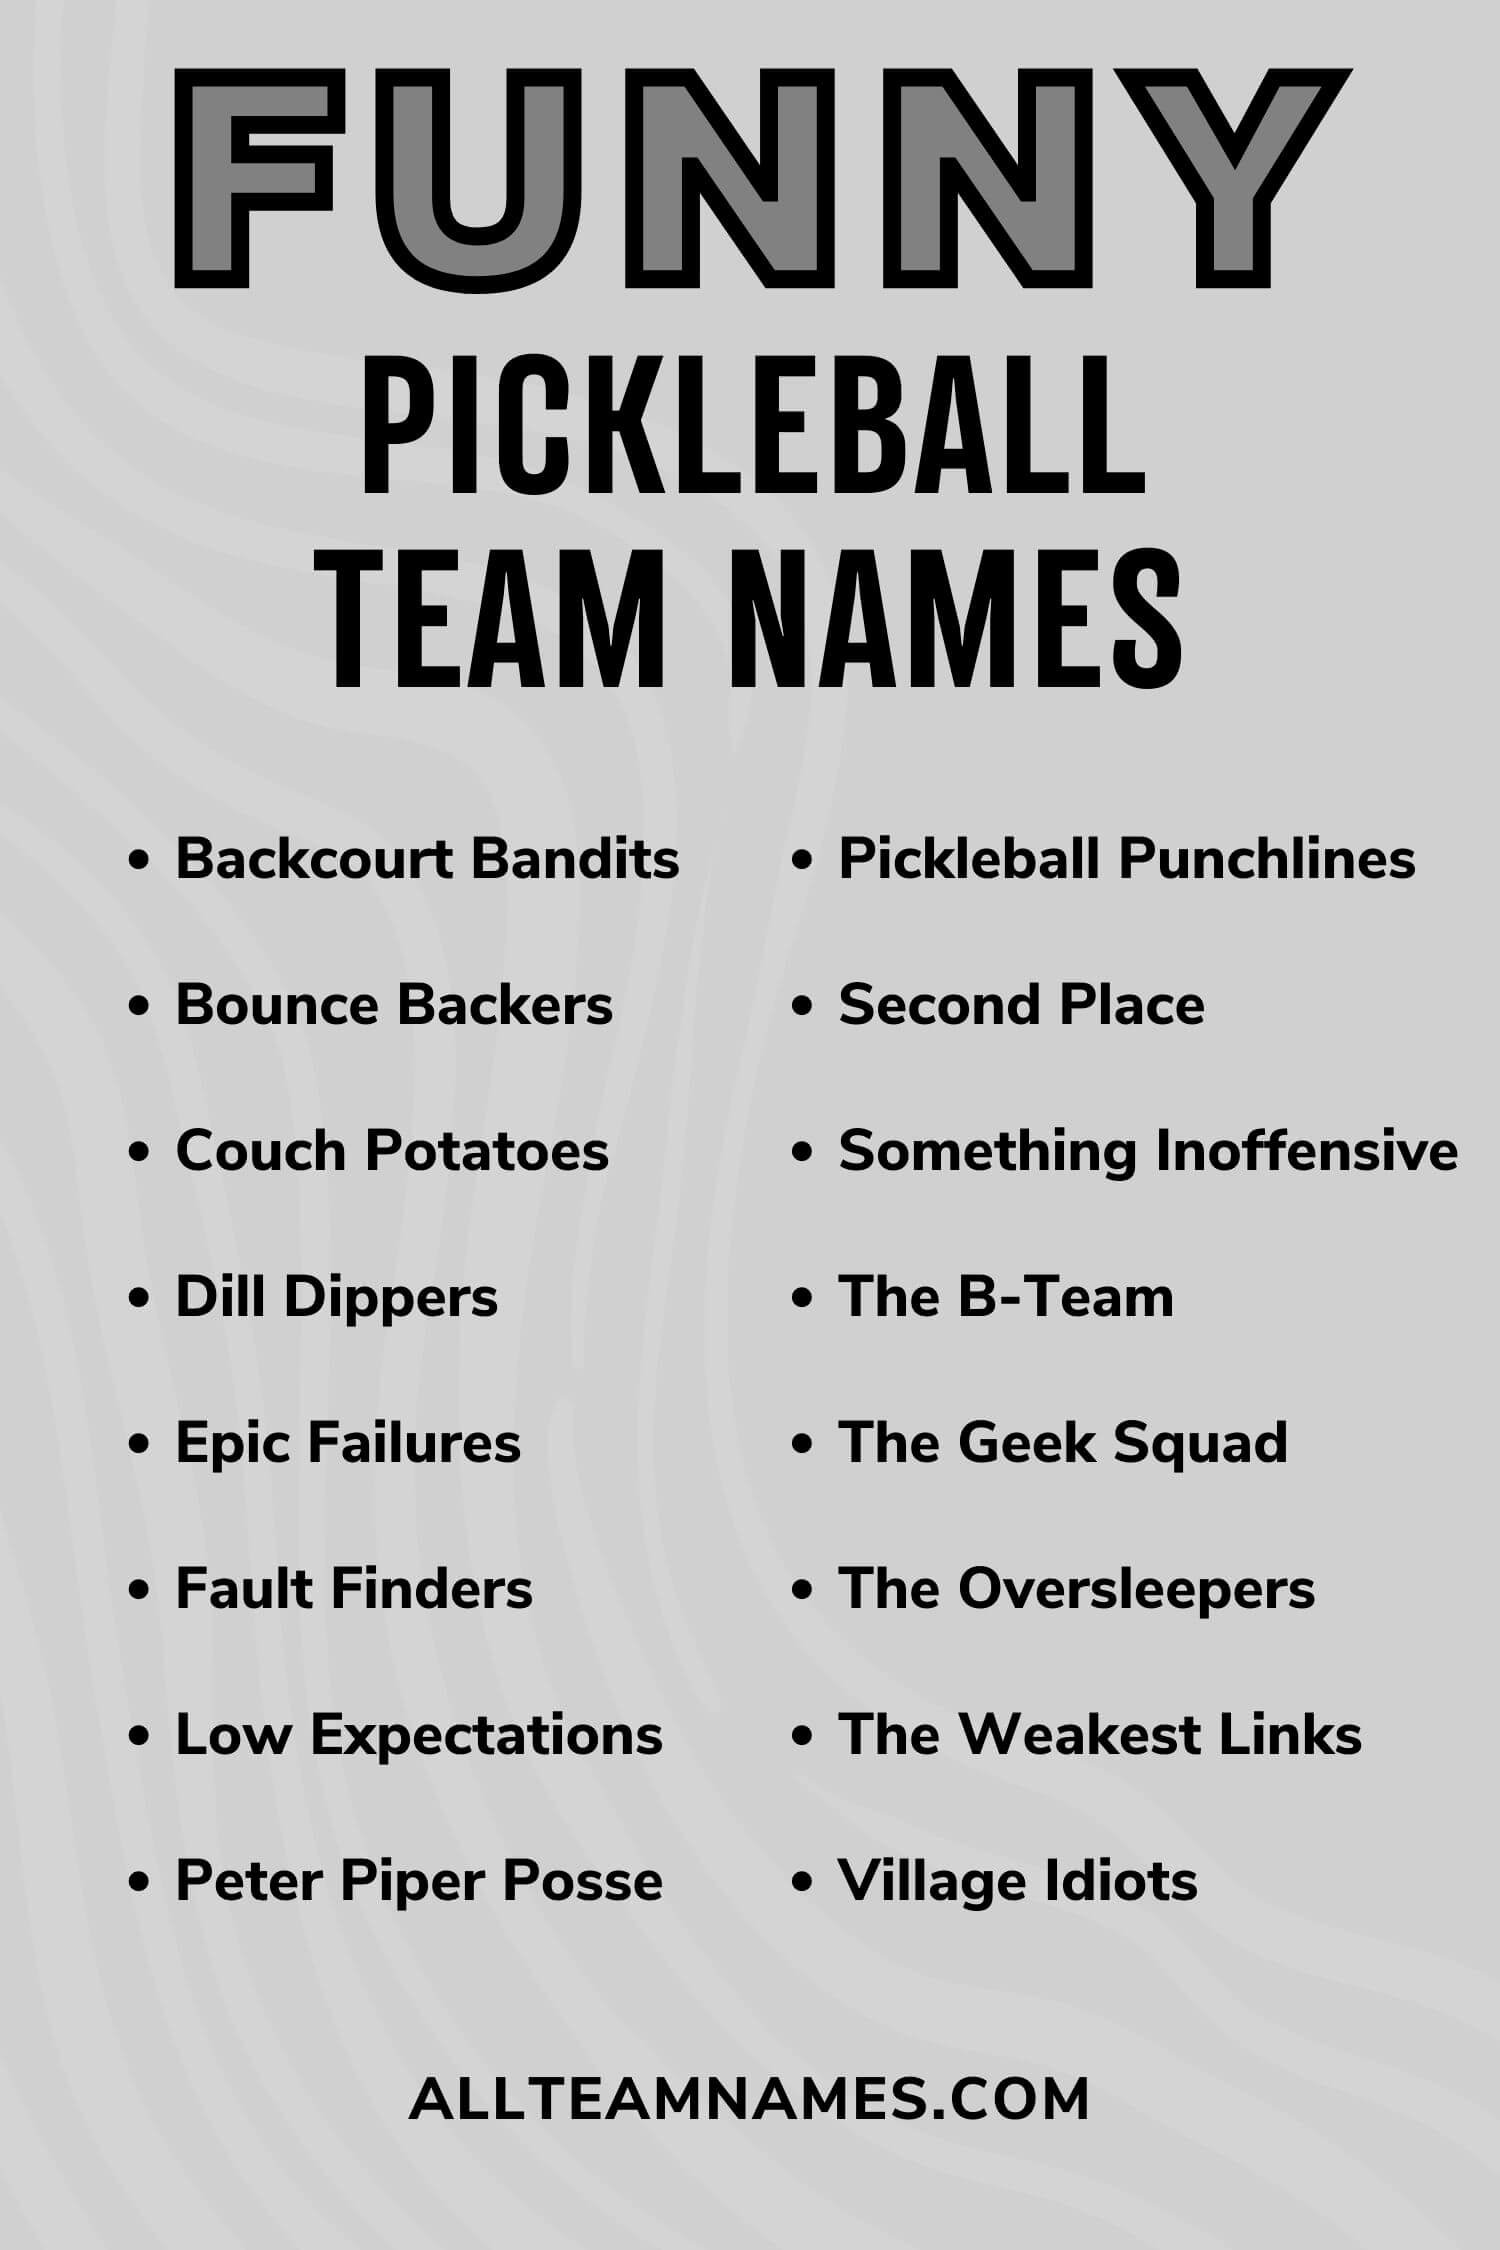 147 Pickleball Team Names That Are Creative and Funny